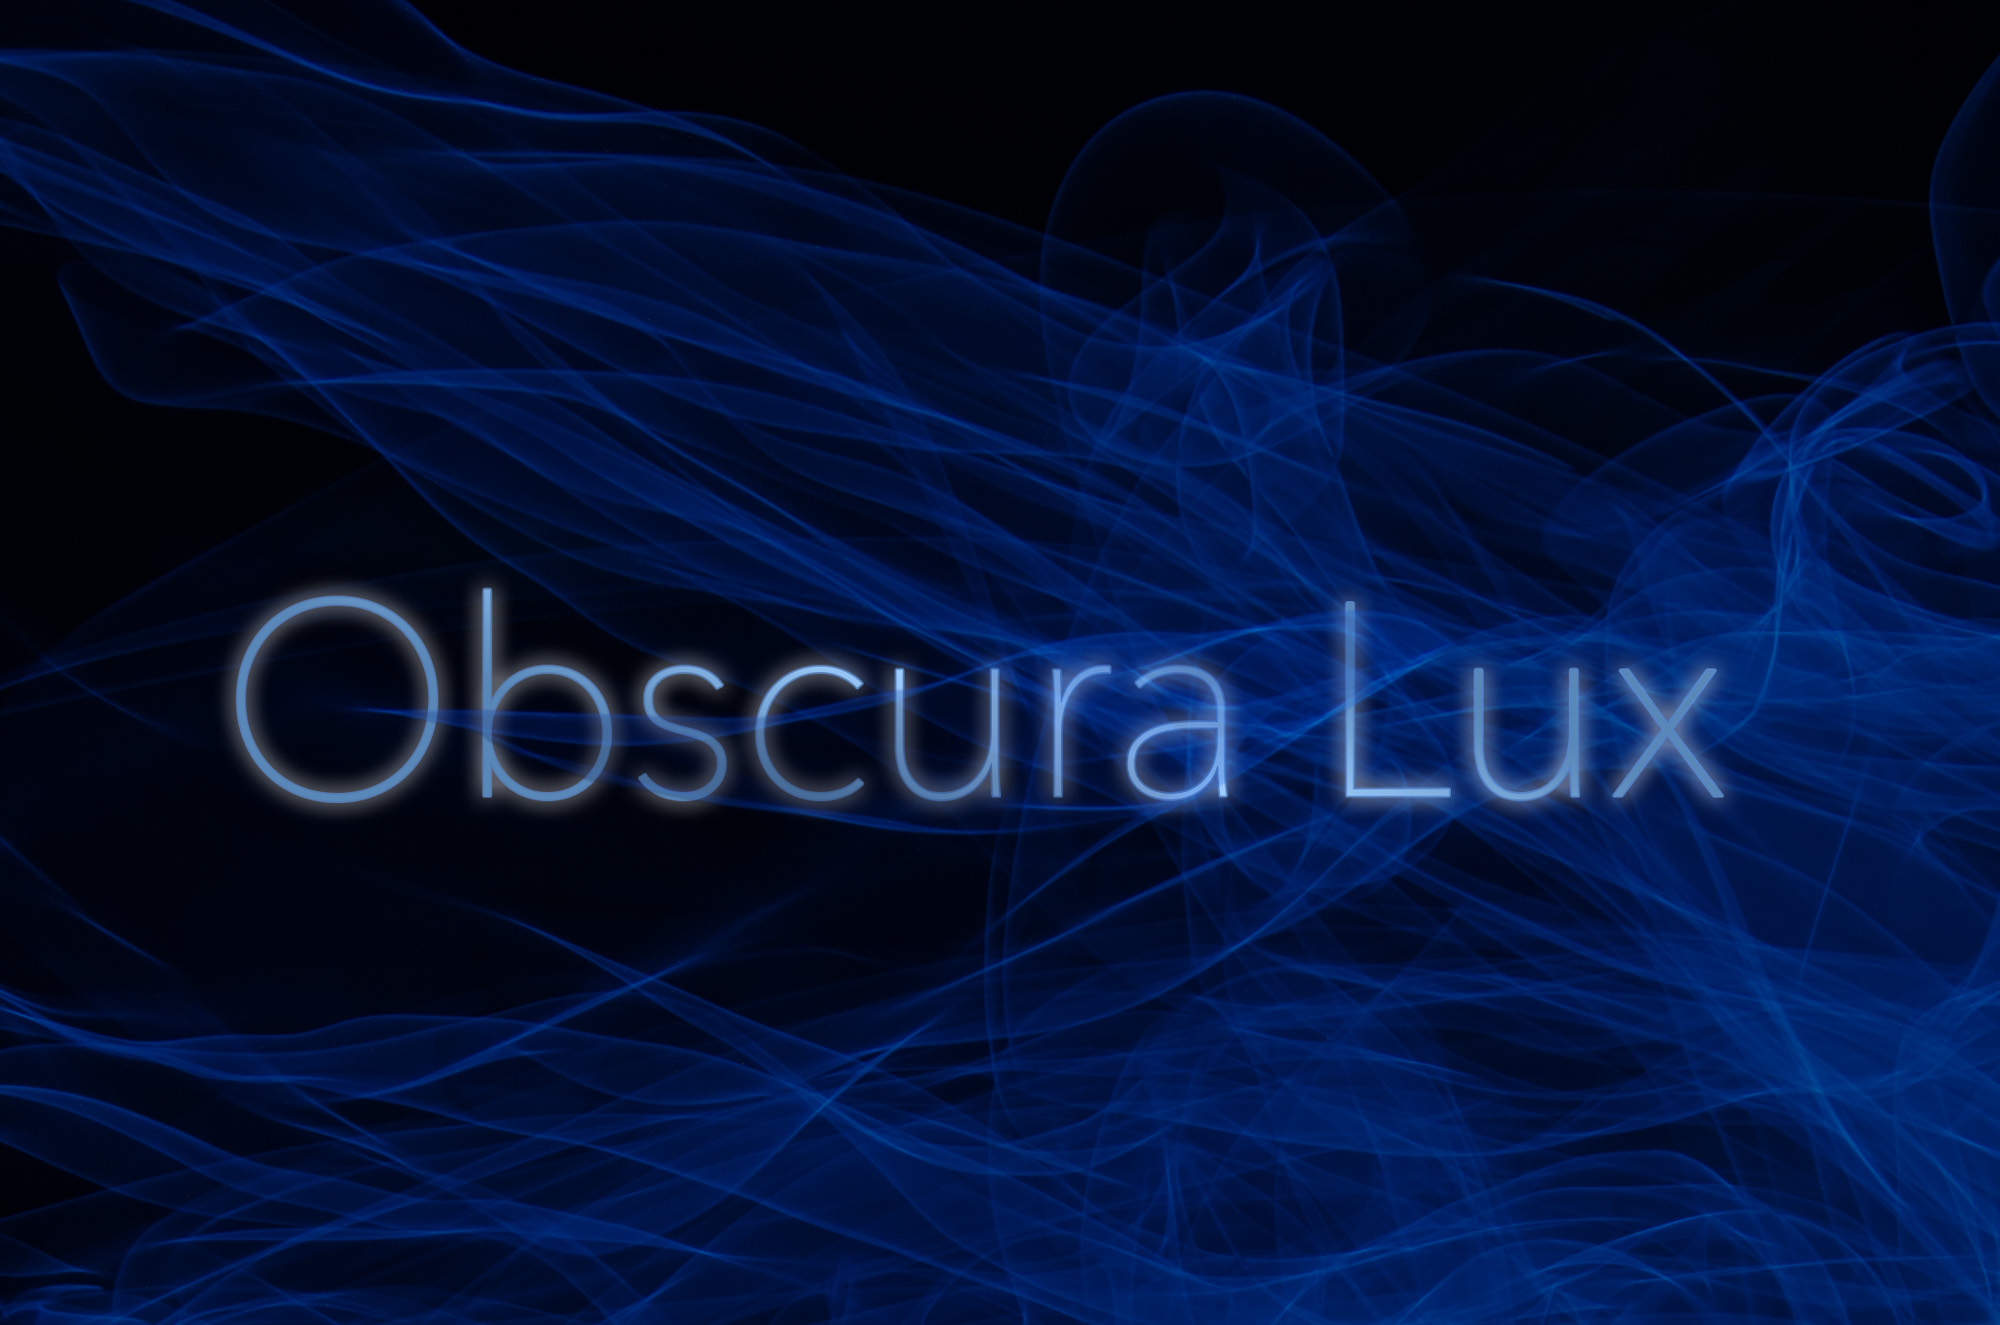 Obscura Lux – A Collection of Photons